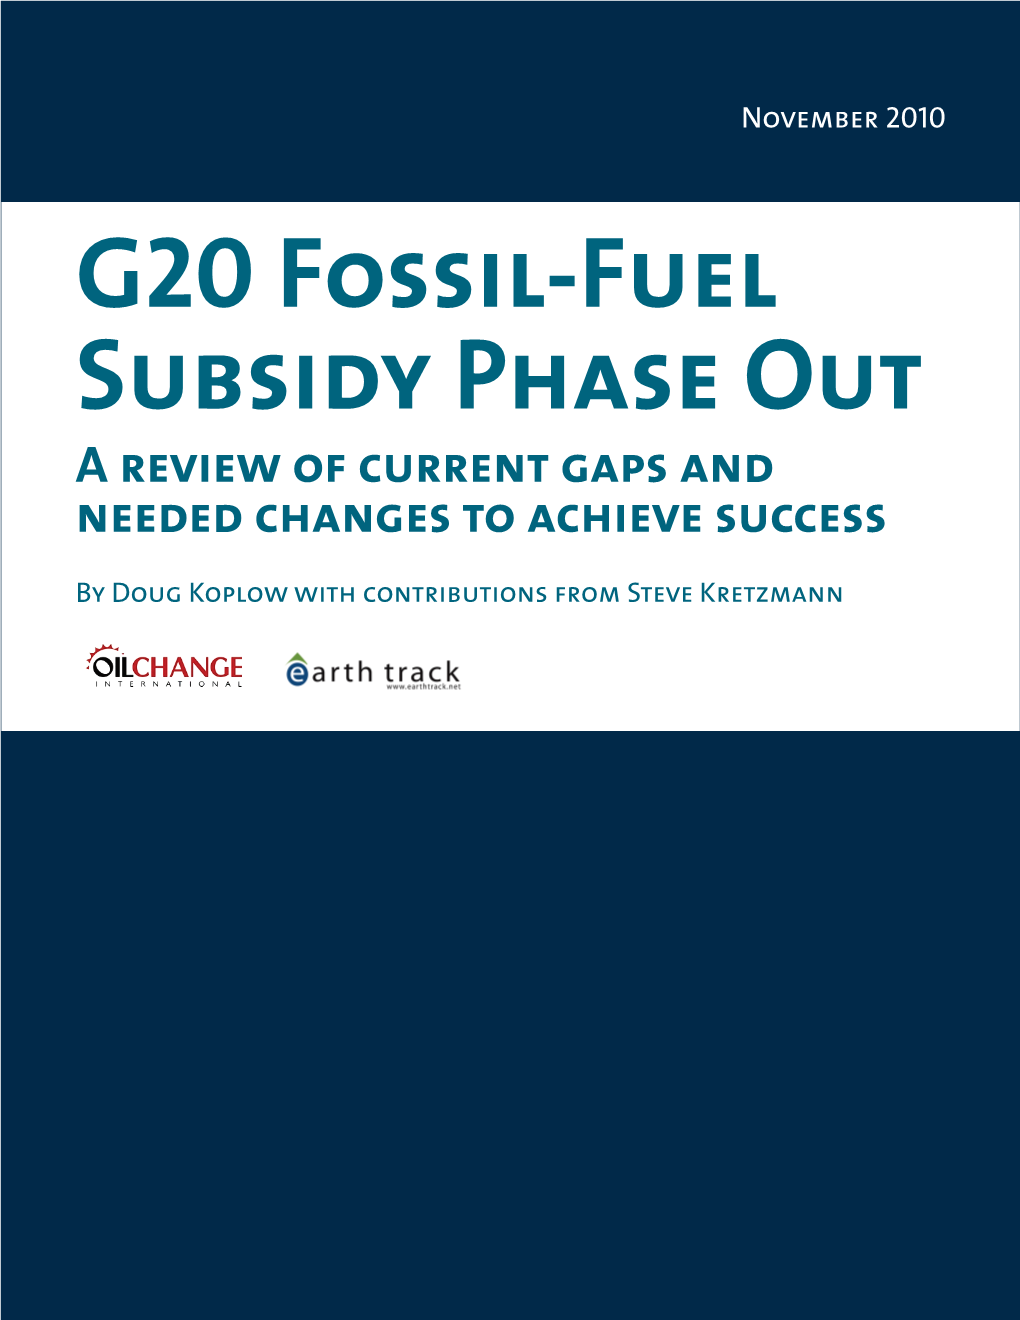 G20 Fossil-Fuel Subsidy Phase out a Review of Current Gaps and Needed Changes to Achieve Success